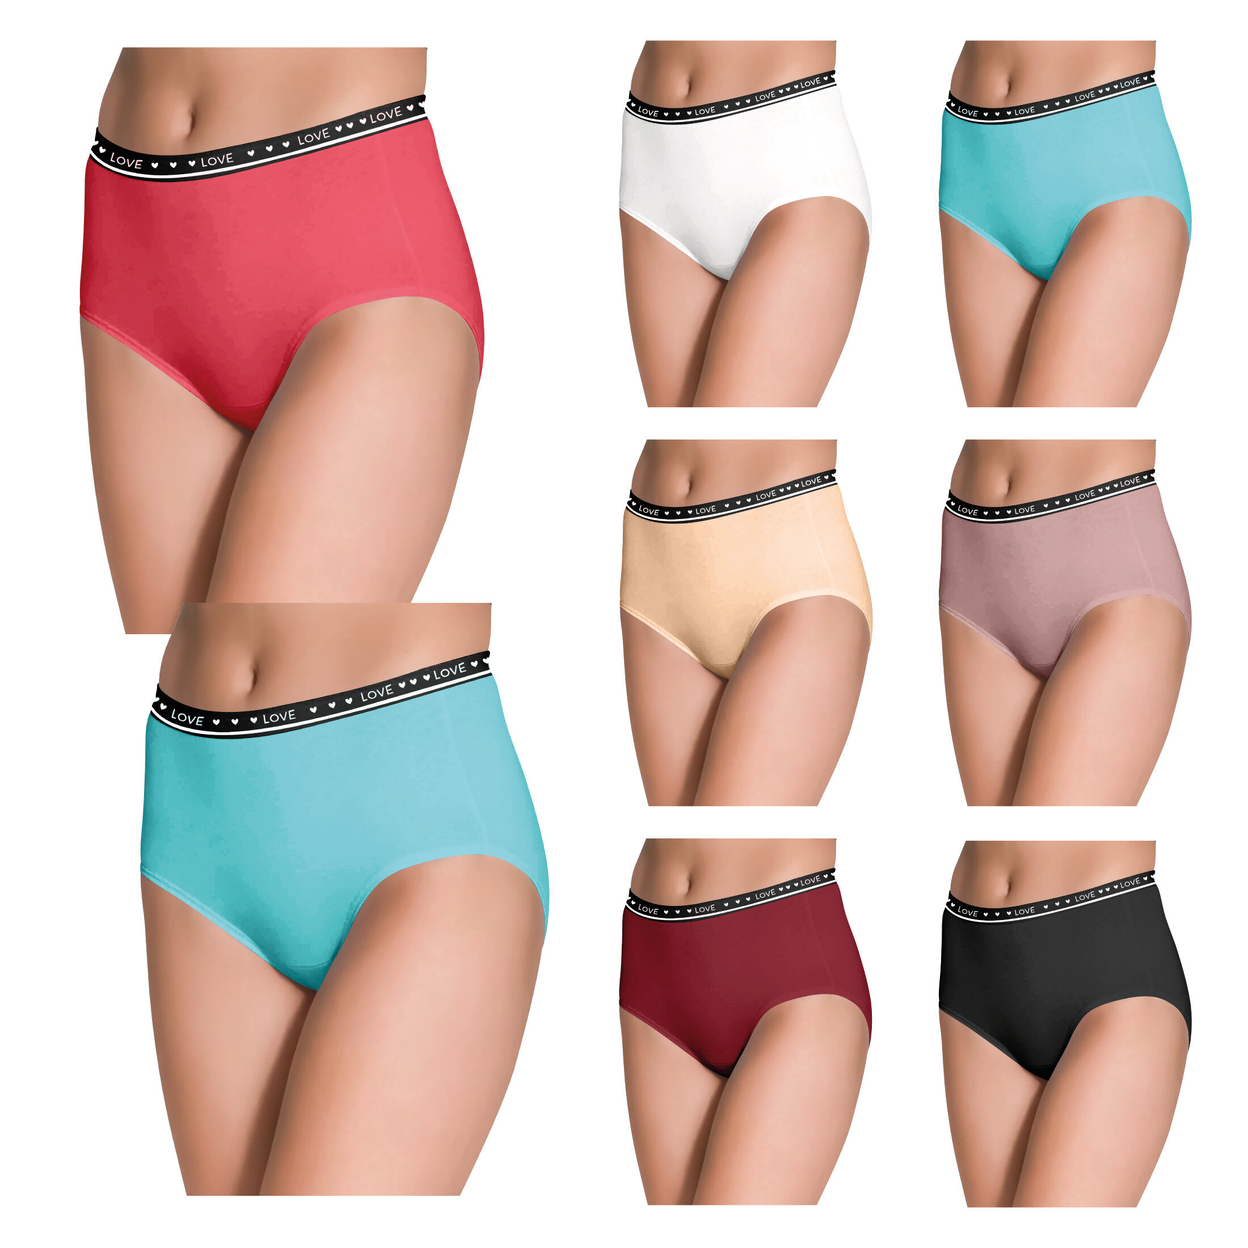 5-Pack: Women's Ultra Soft Moisture Wicking Panties Cotton Perfect Fit Underwear (Plus Sizes Available) - Large